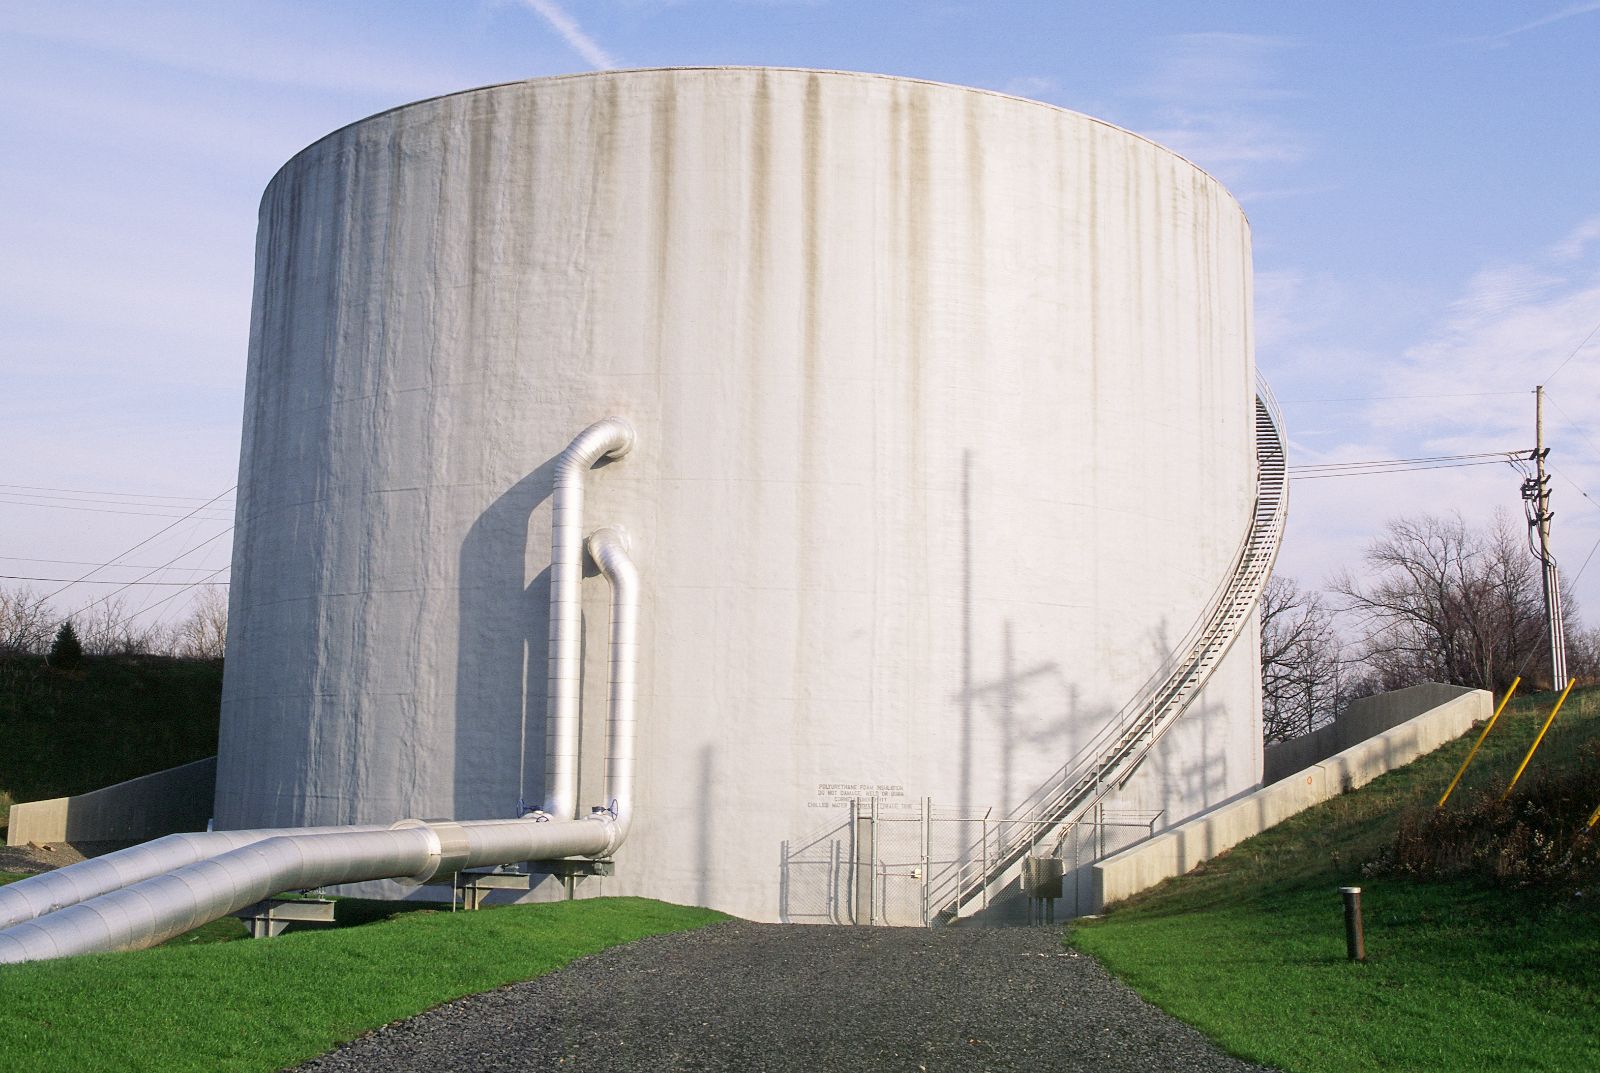 The Cornell Thermal Energy Storage Tank